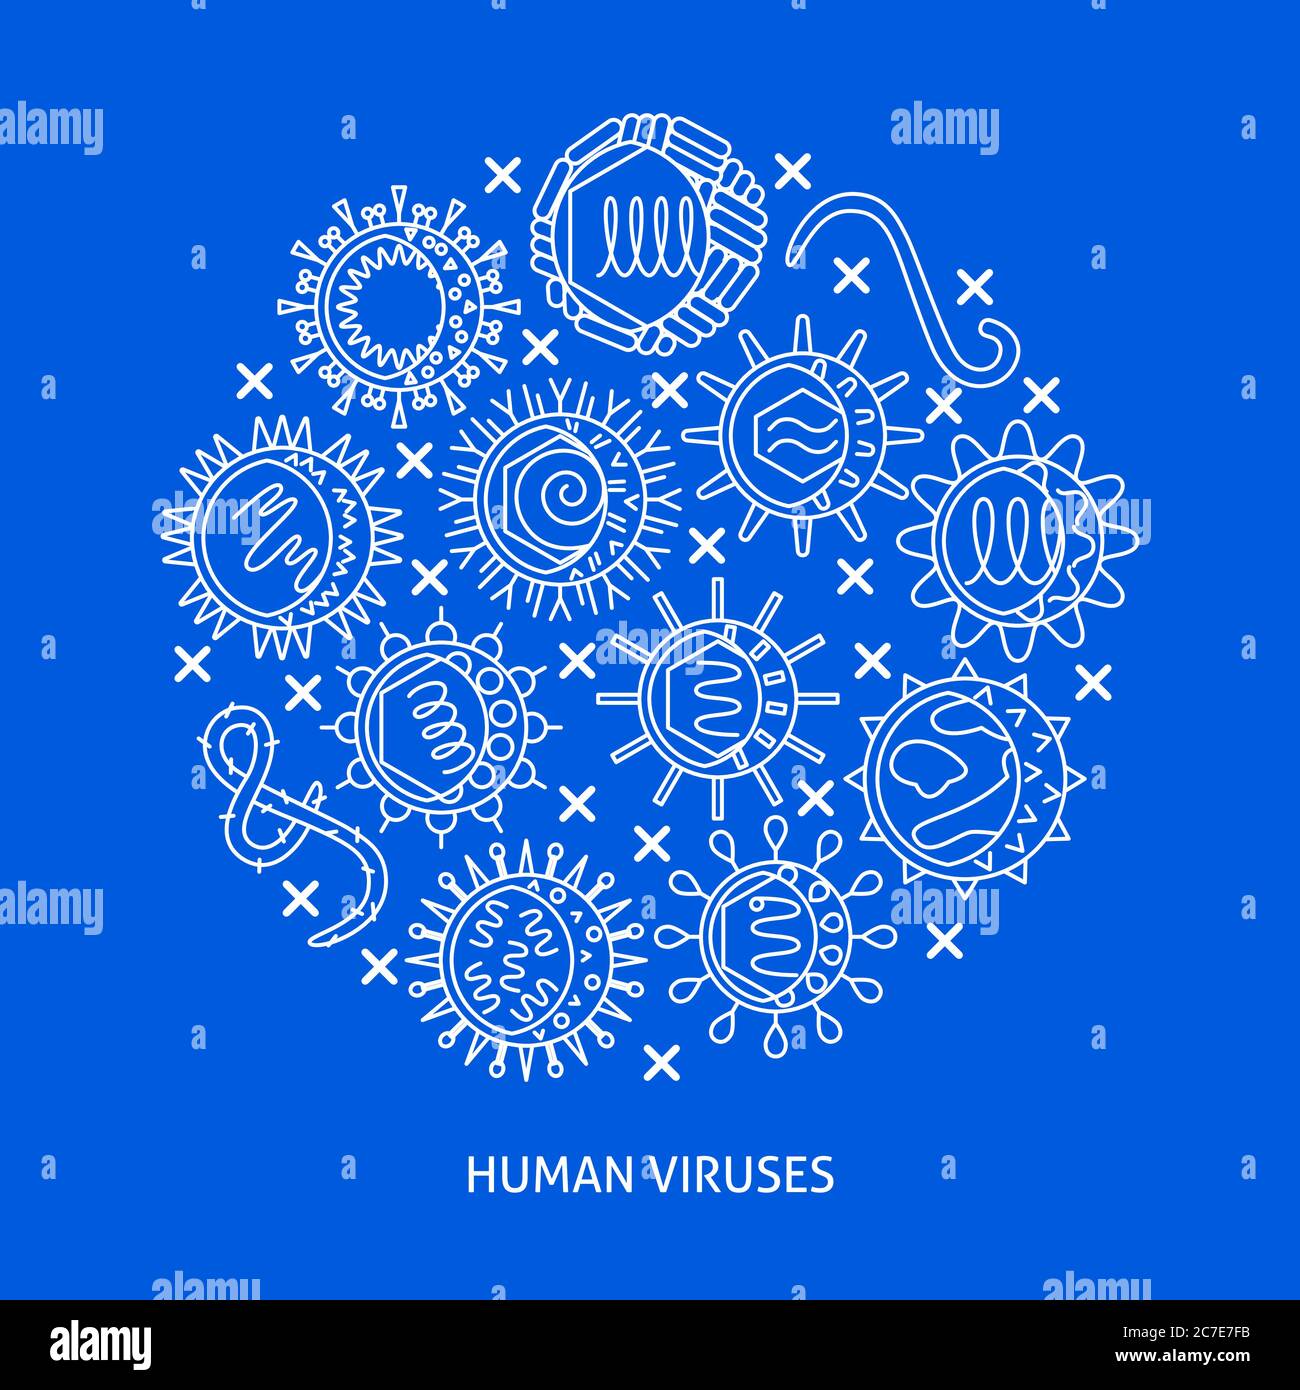 Human viruses round concept banner in line style with place for text. Microbiology poster with infection cells symbols collection. Vector illustration Stock Vector